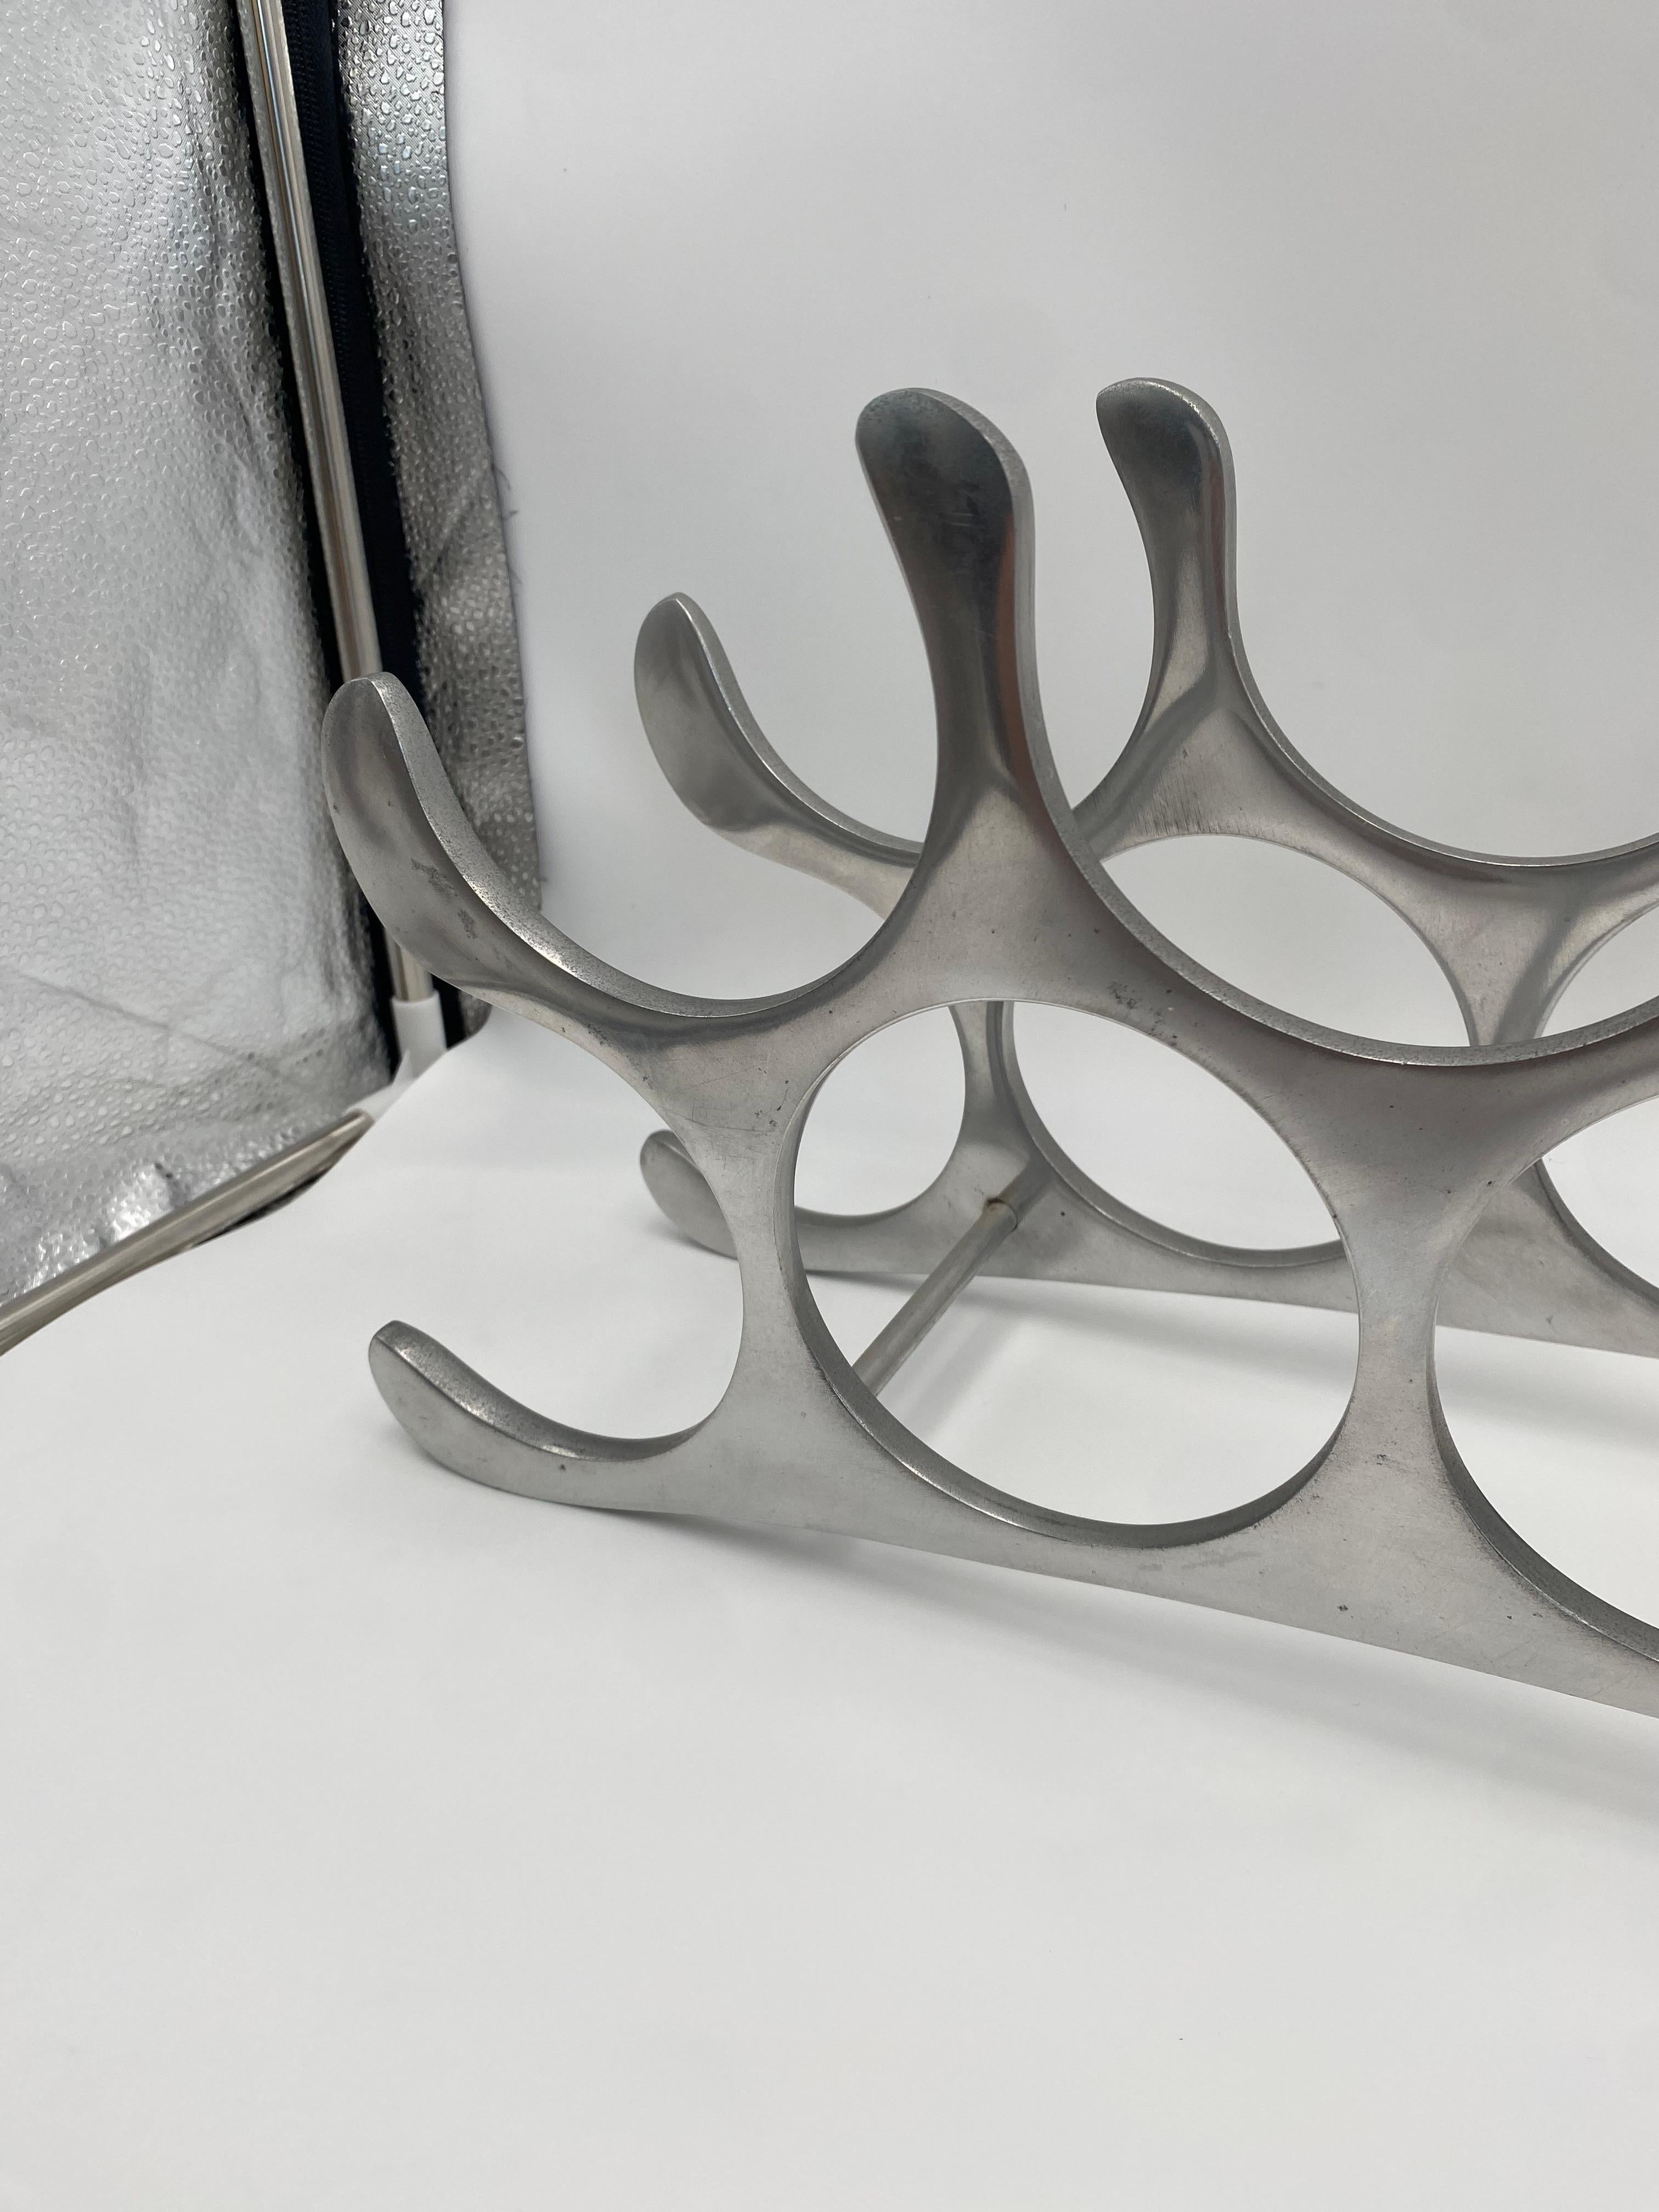 9 Bottle Polished Aluminum Wine Rack By Michael Noll,  Germany 1990s In Good Condition For Sale In Costa Mesa, CA